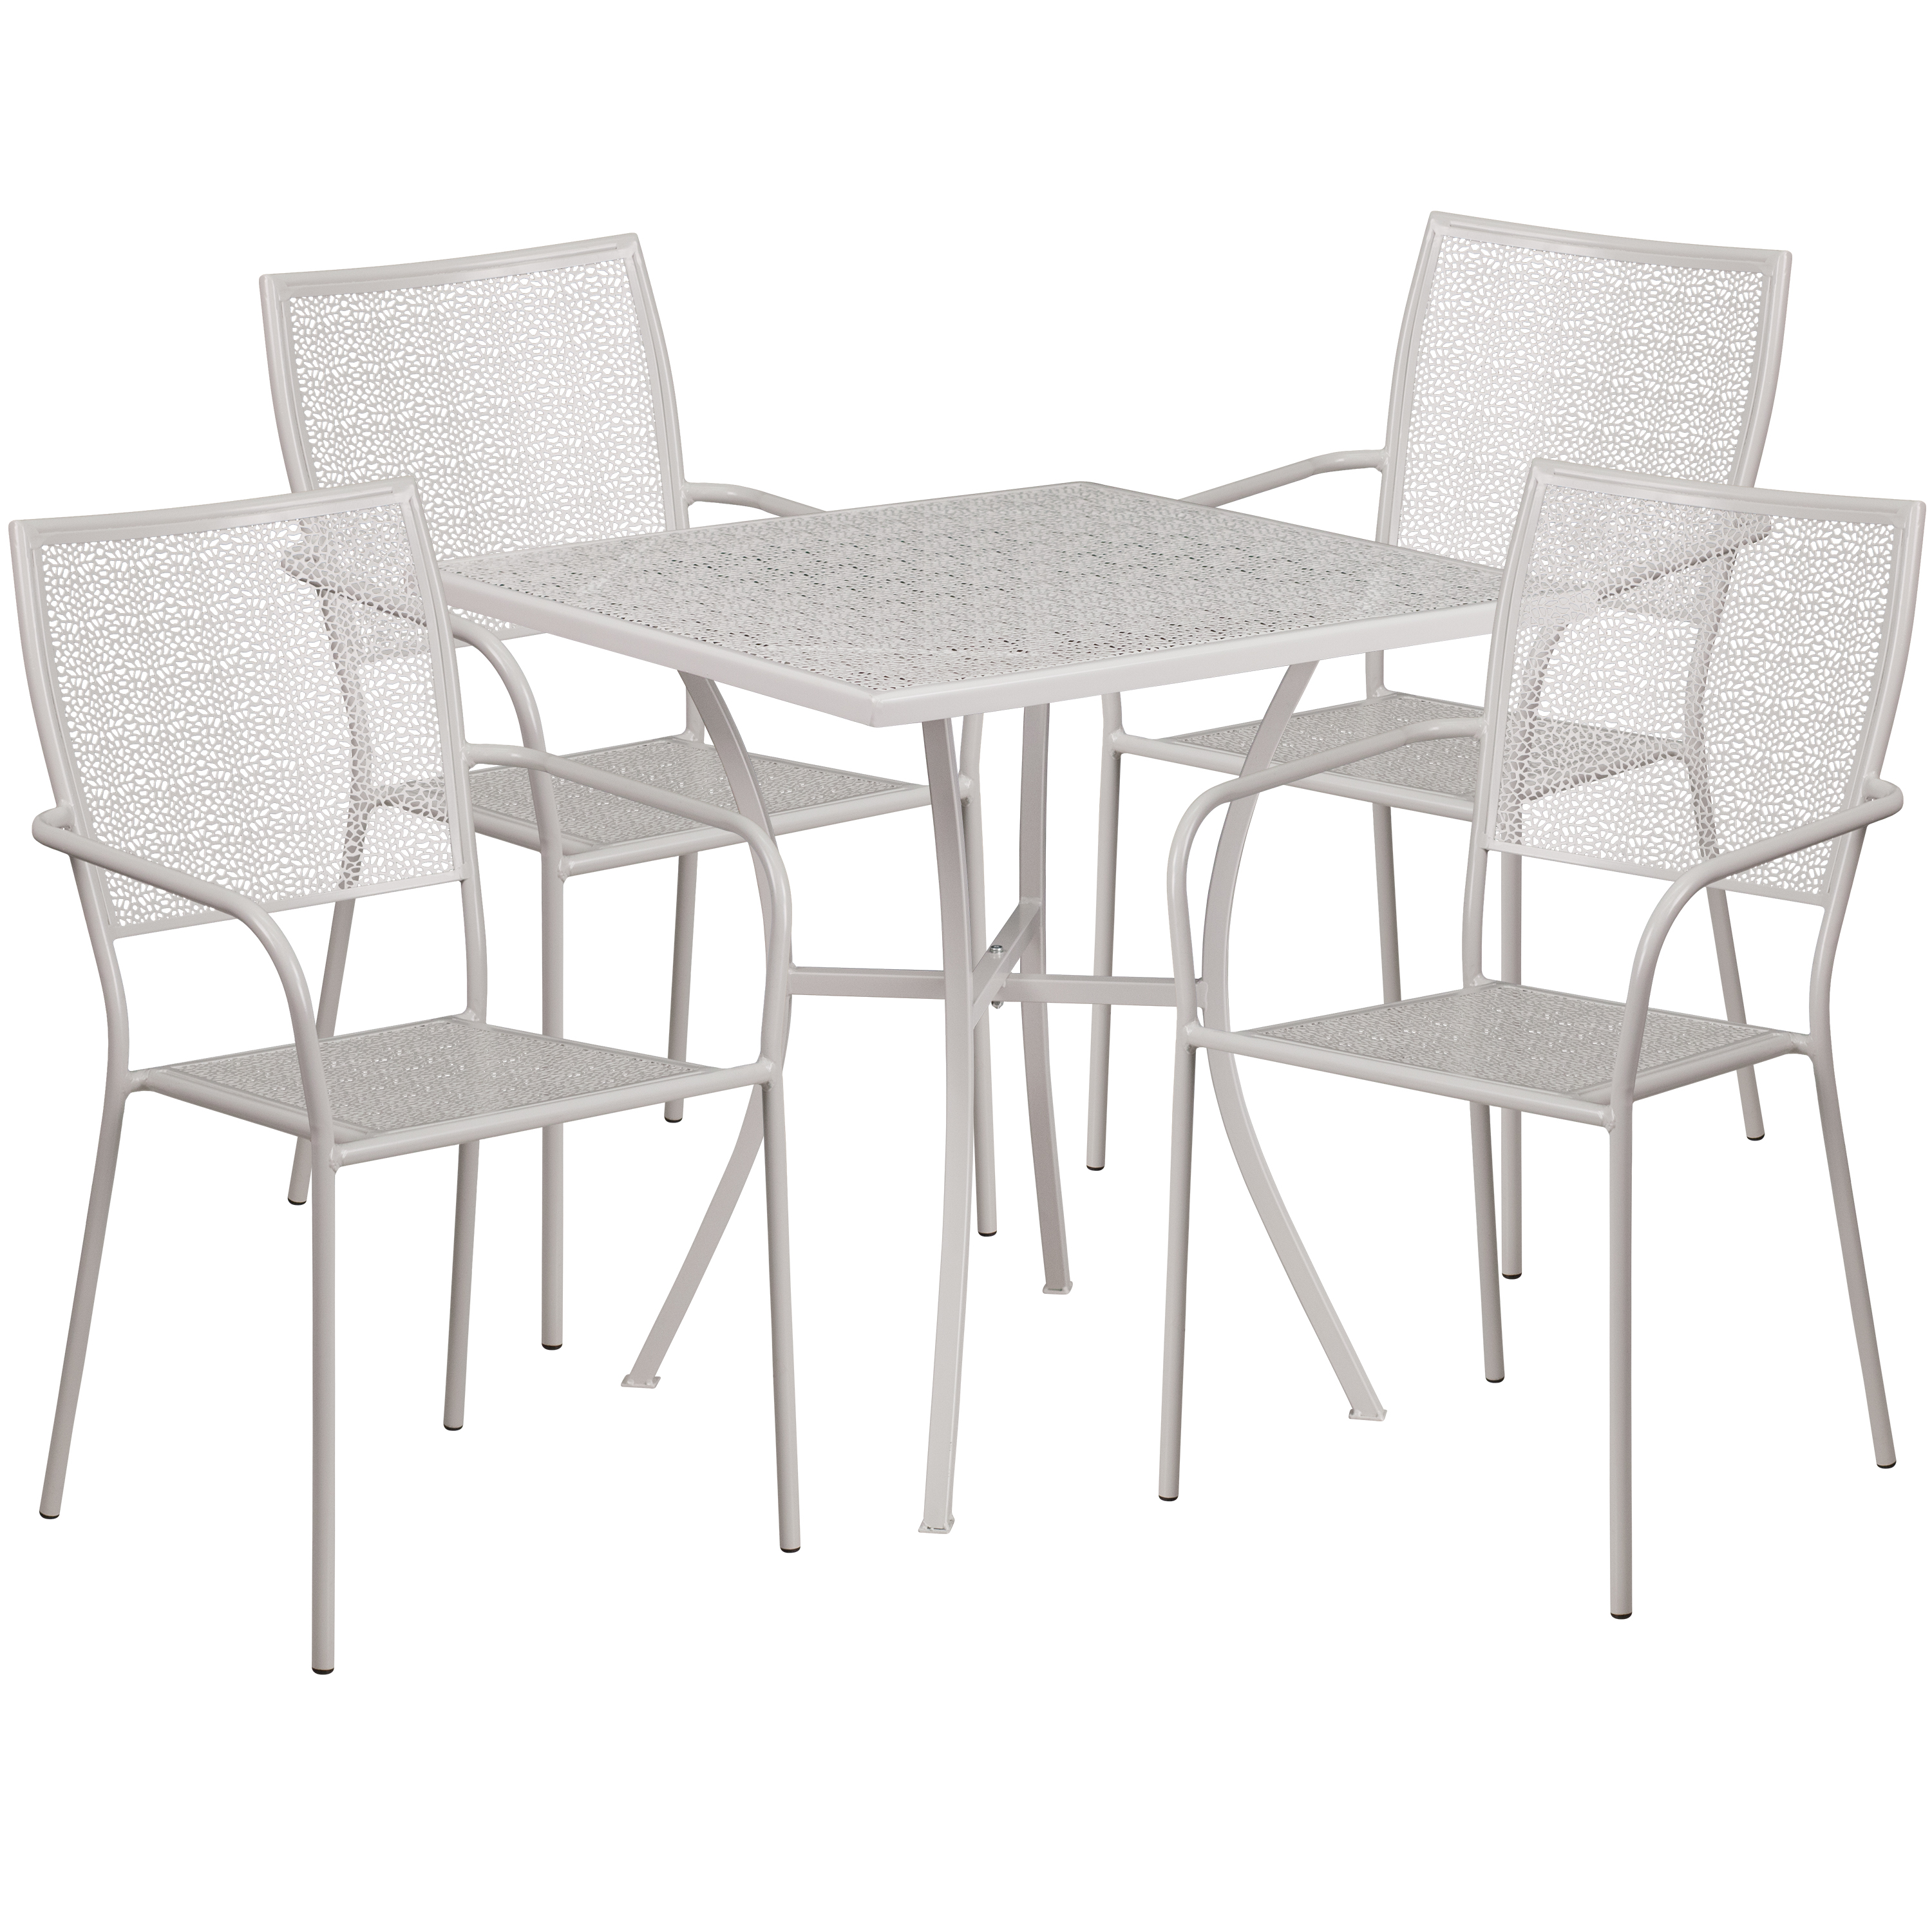 Flash Furniture CO-28SQ-02CHR4-SIL-GG 28" Square Light Gray Indoor/Outdoor Steel Patio Table Set with 4 Square Back Chairs